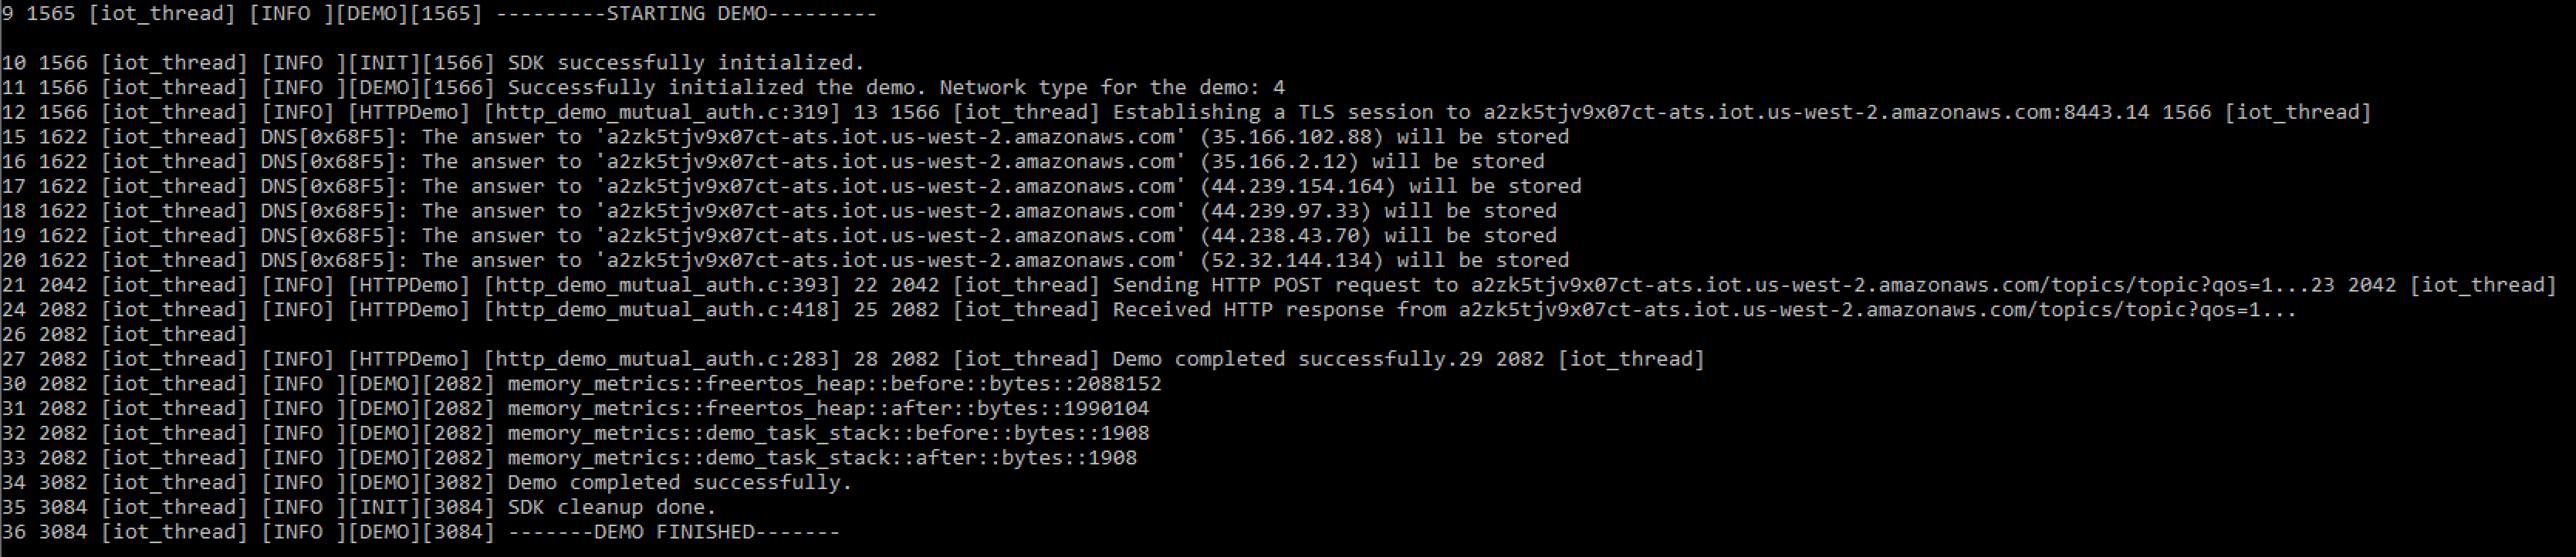 Log output showing Amazon IoT demo initialization, TLS session establishment, HTTP POST requests, and memory metrics indicating successful demo completion.